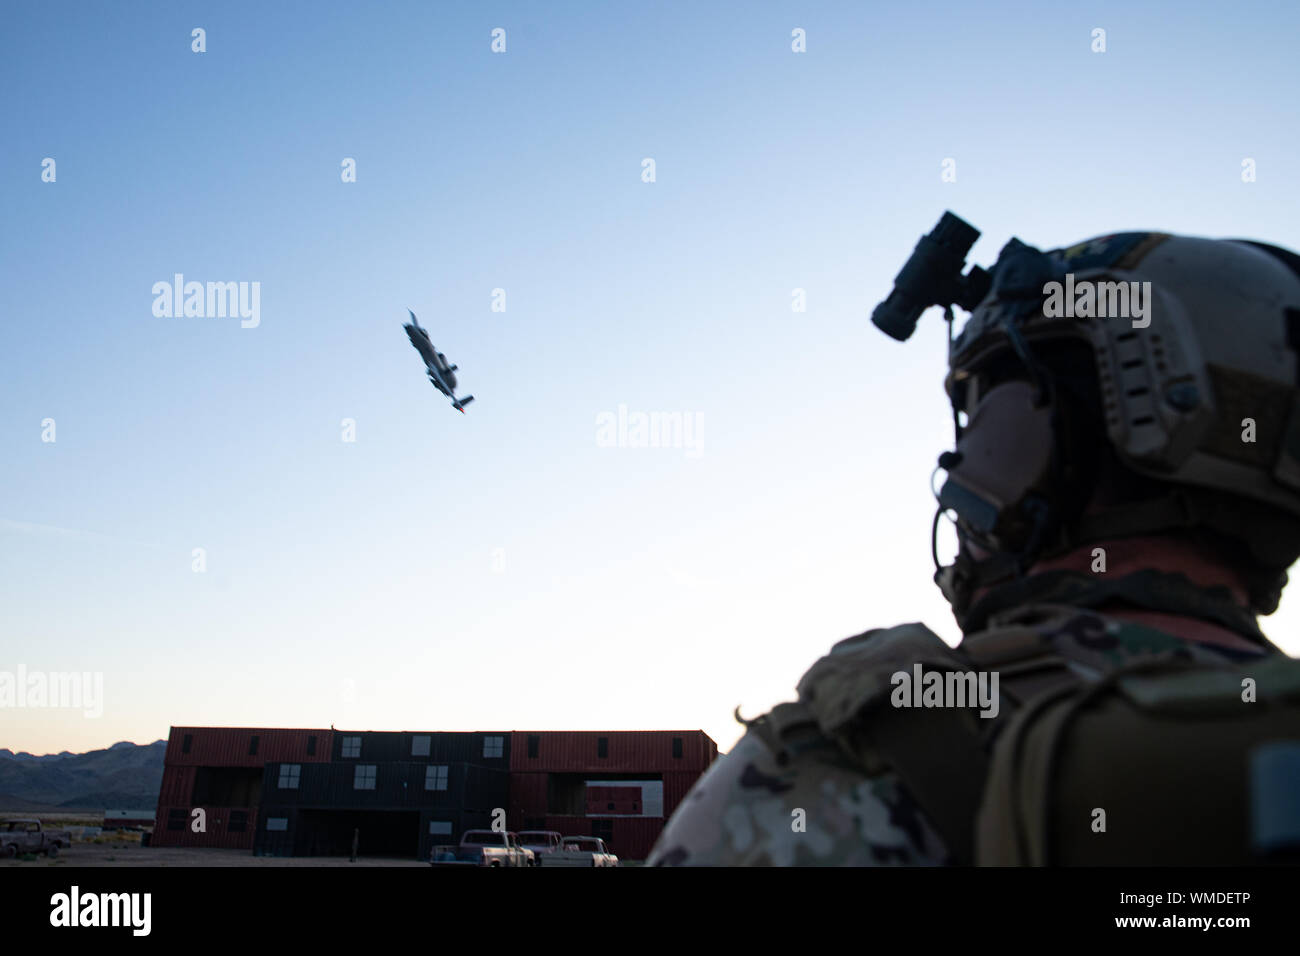 A Green Beret assigned to 3rd Special Forces Group (Airborne) observes an A-10 Thunderbolt ll flying overhead after successfully eliminating a target during a training event near Nellis Air Force Base, Nev. Aug. 26, 2019. U.S. Special Forces trained with U.S. Air Force Joint Terminal Attack Controllers and utilized weapons ranging from small arms to A-10 Thunderbolt ll aircraft. (U.S. Army photo by Sgt. Steven Lewis) Stock Photo